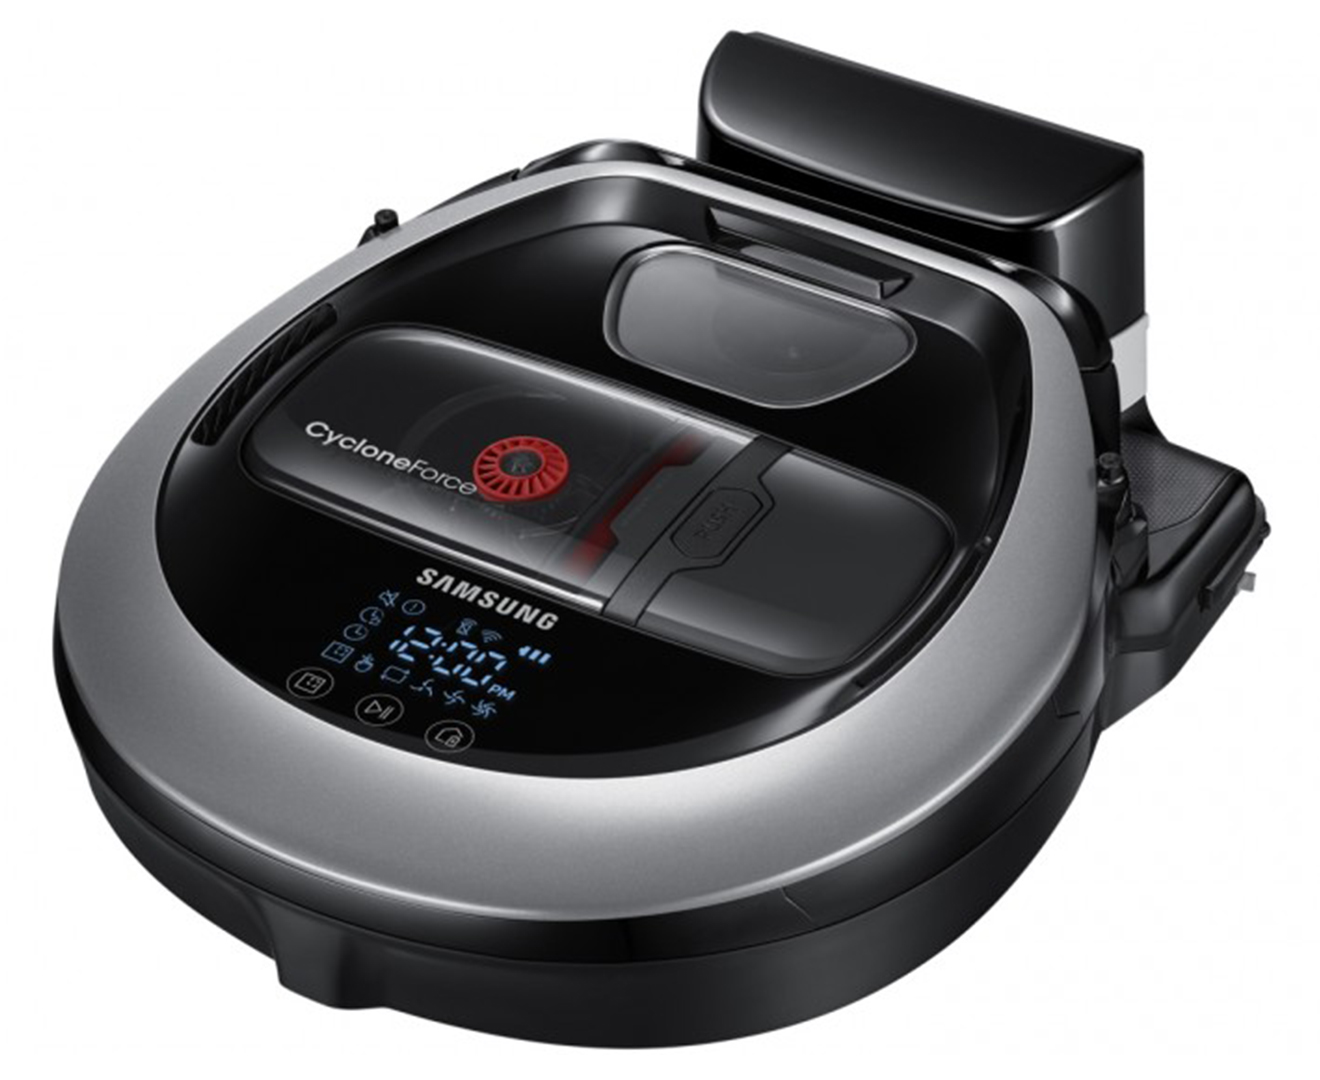 samsung-powerbot-plus-robot-vacuum-with-wifi-technology-catch-co-nz